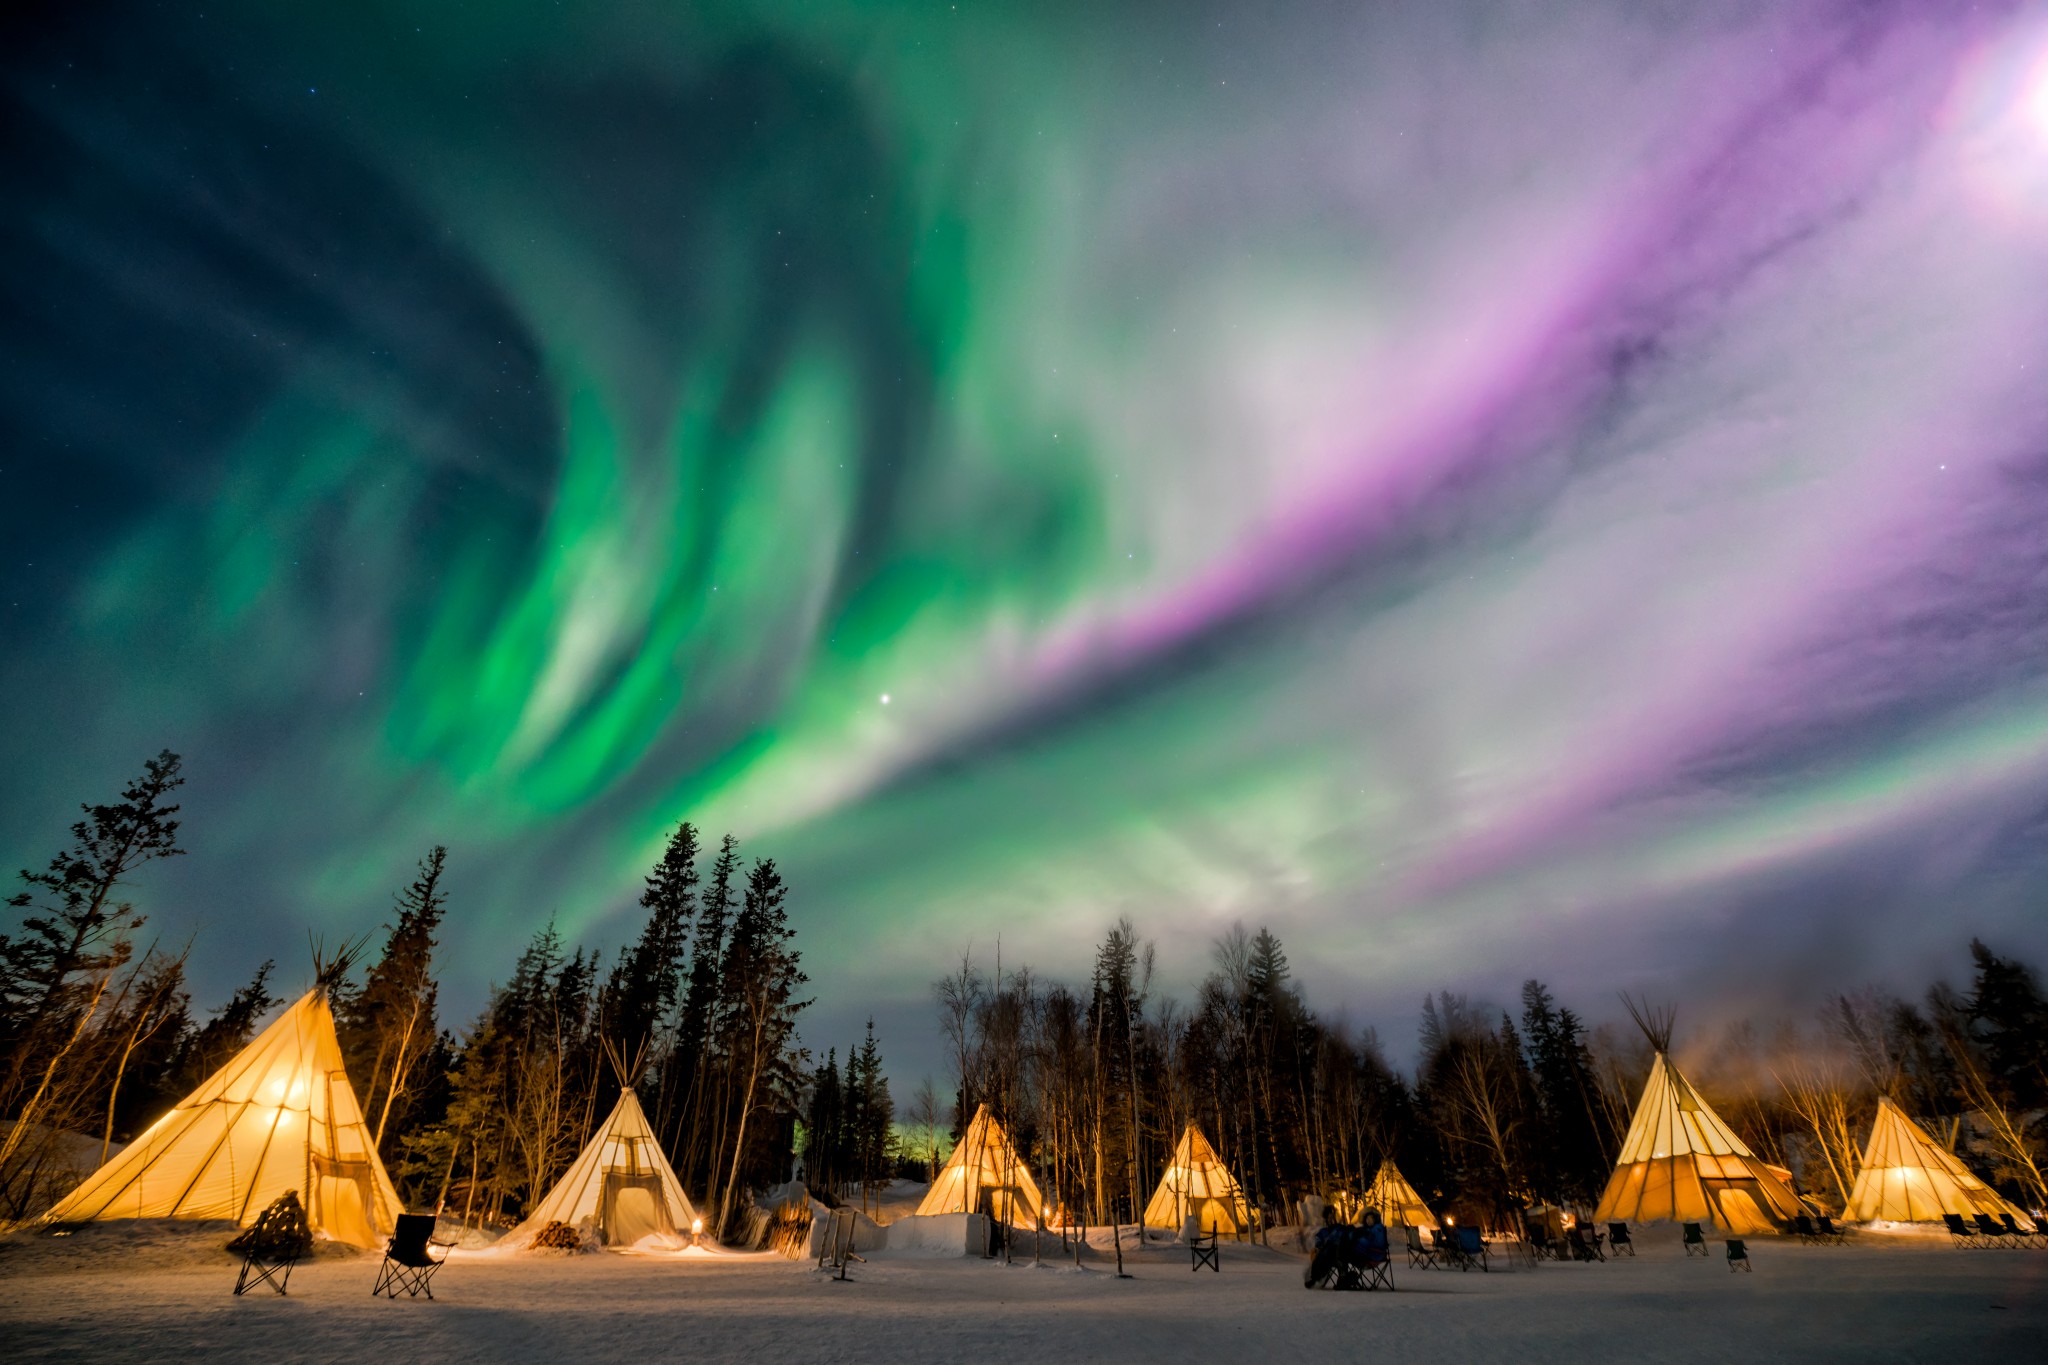 The BEST to See The Northern Lights - Thrifty Nomads